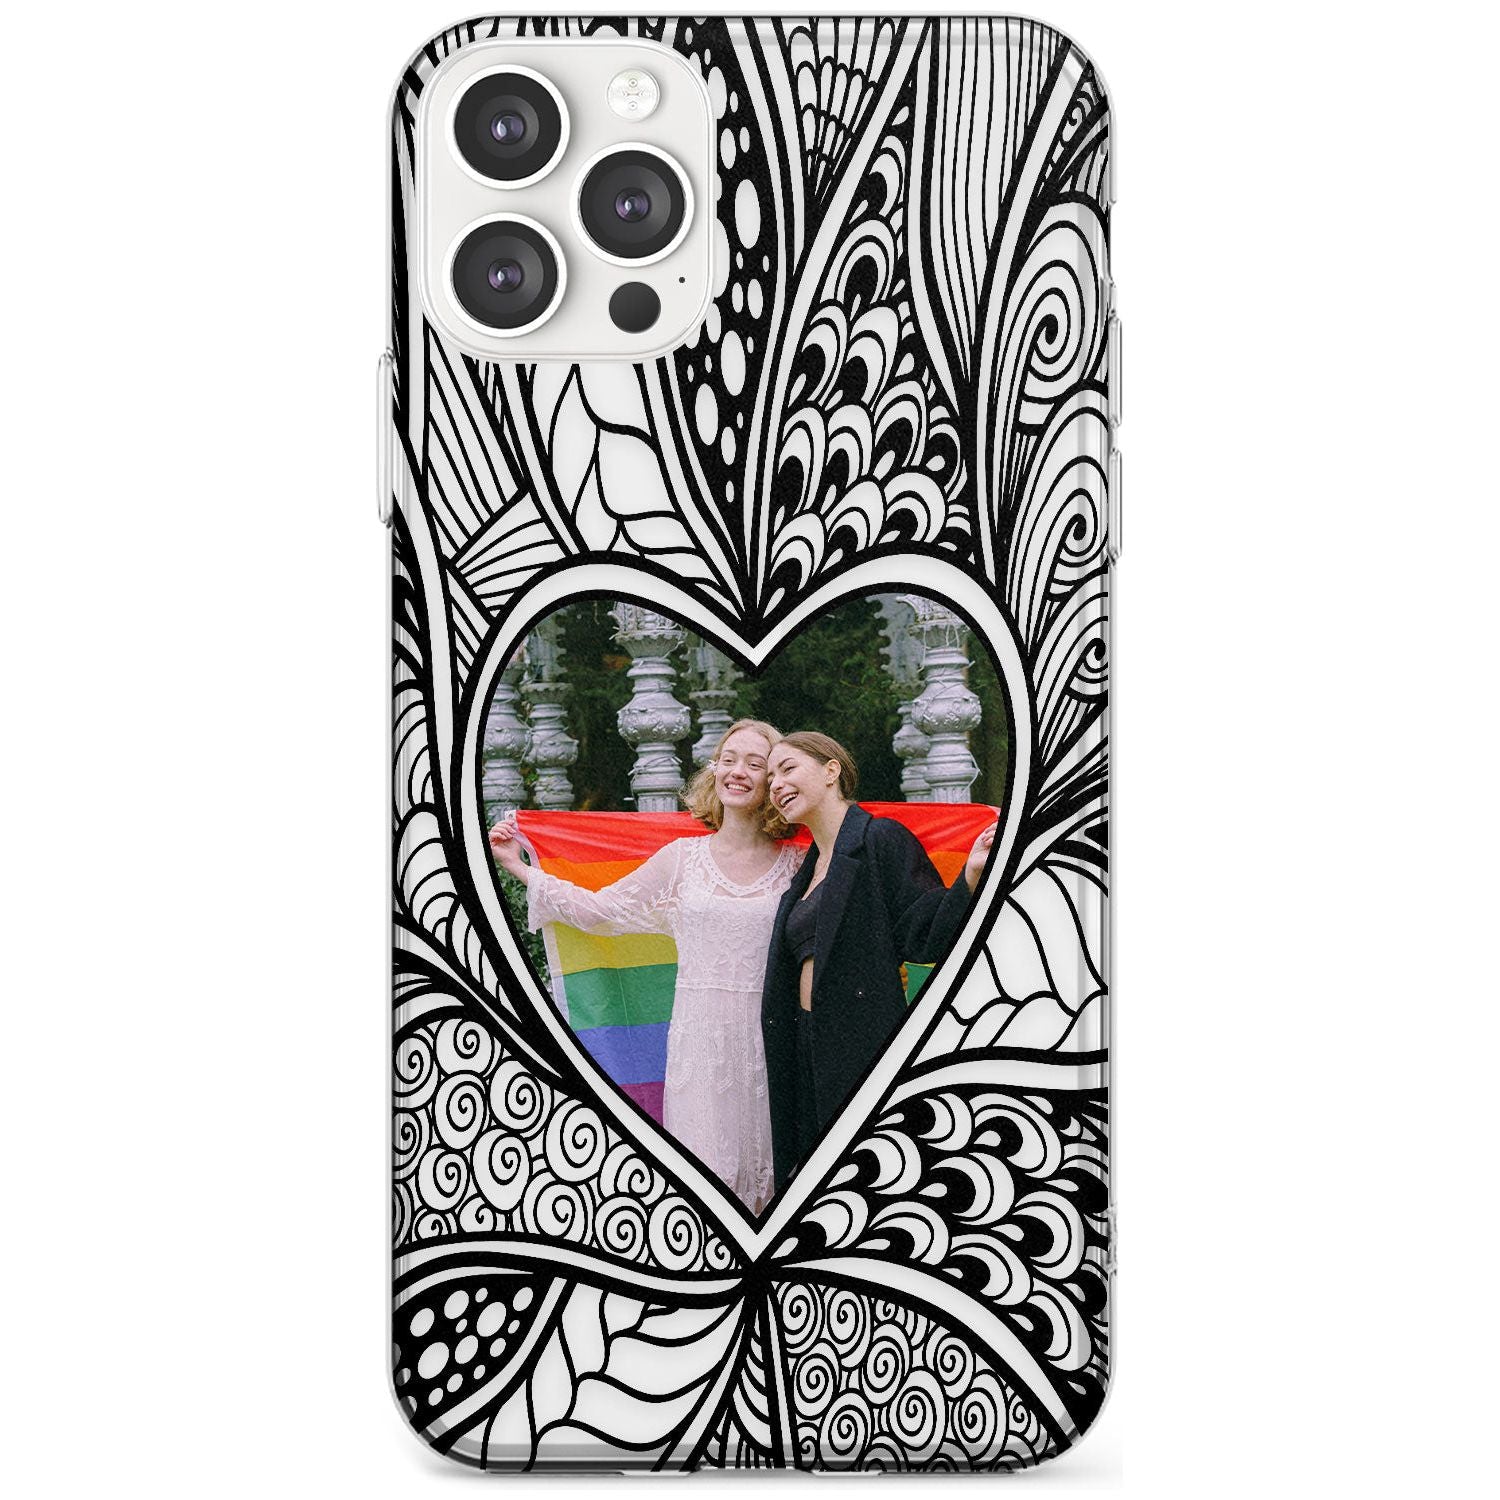 Personalised Henna Heart Photo Case Slim TPU Phone Case for iPhone 11 Pro Max